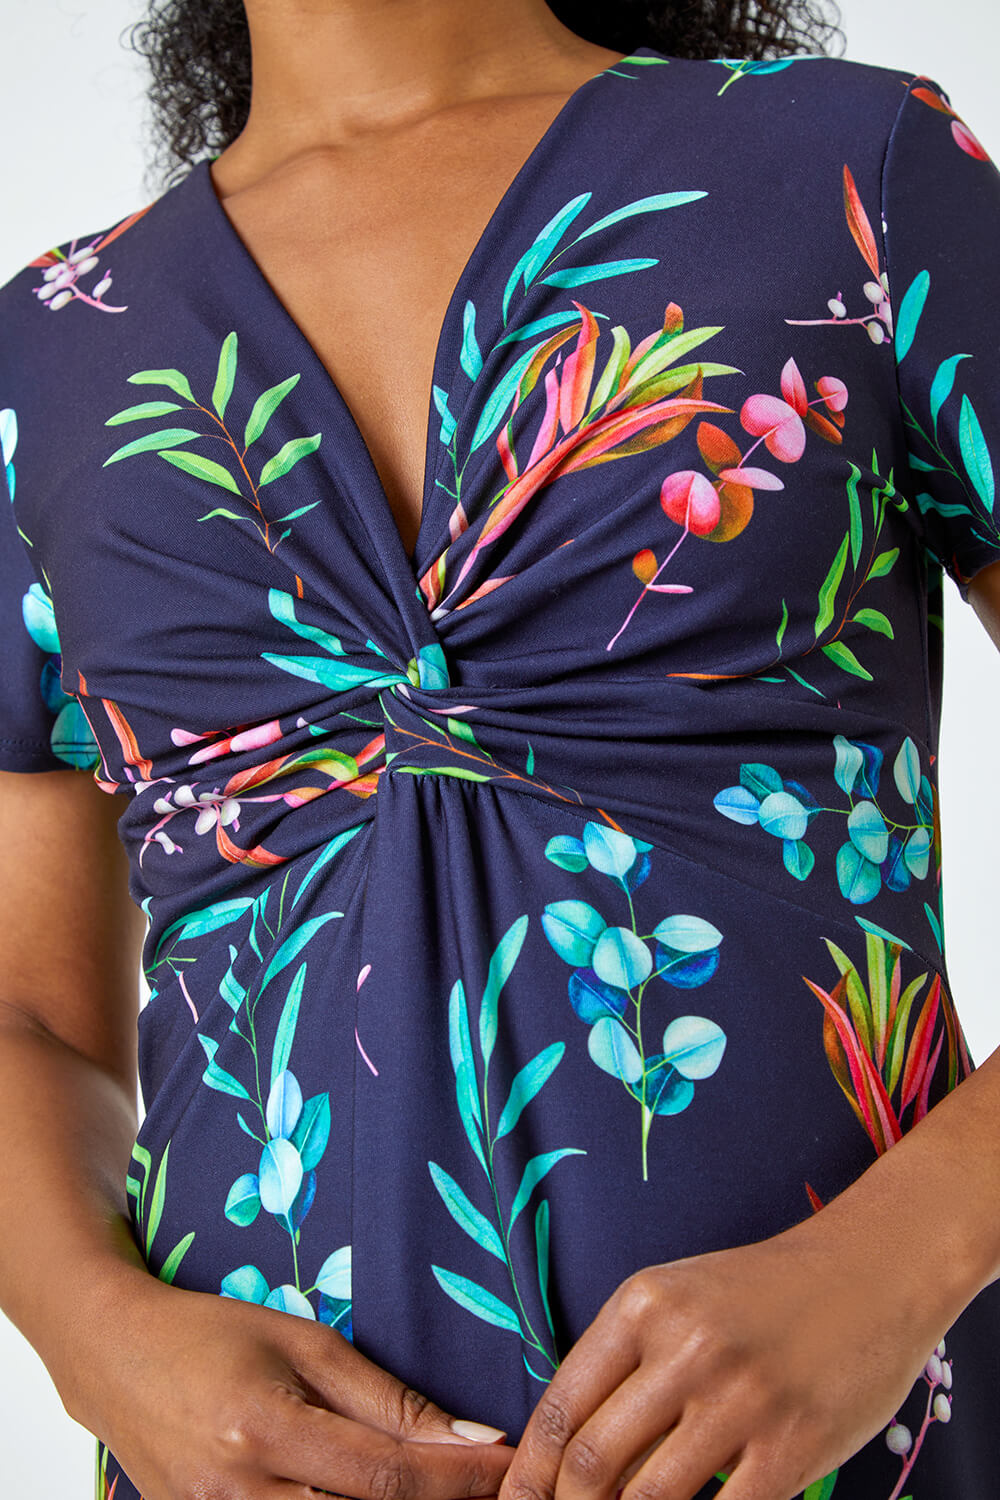 Navy  Petite Floral Twist Detail Stretch Dress, Image 5 of 5